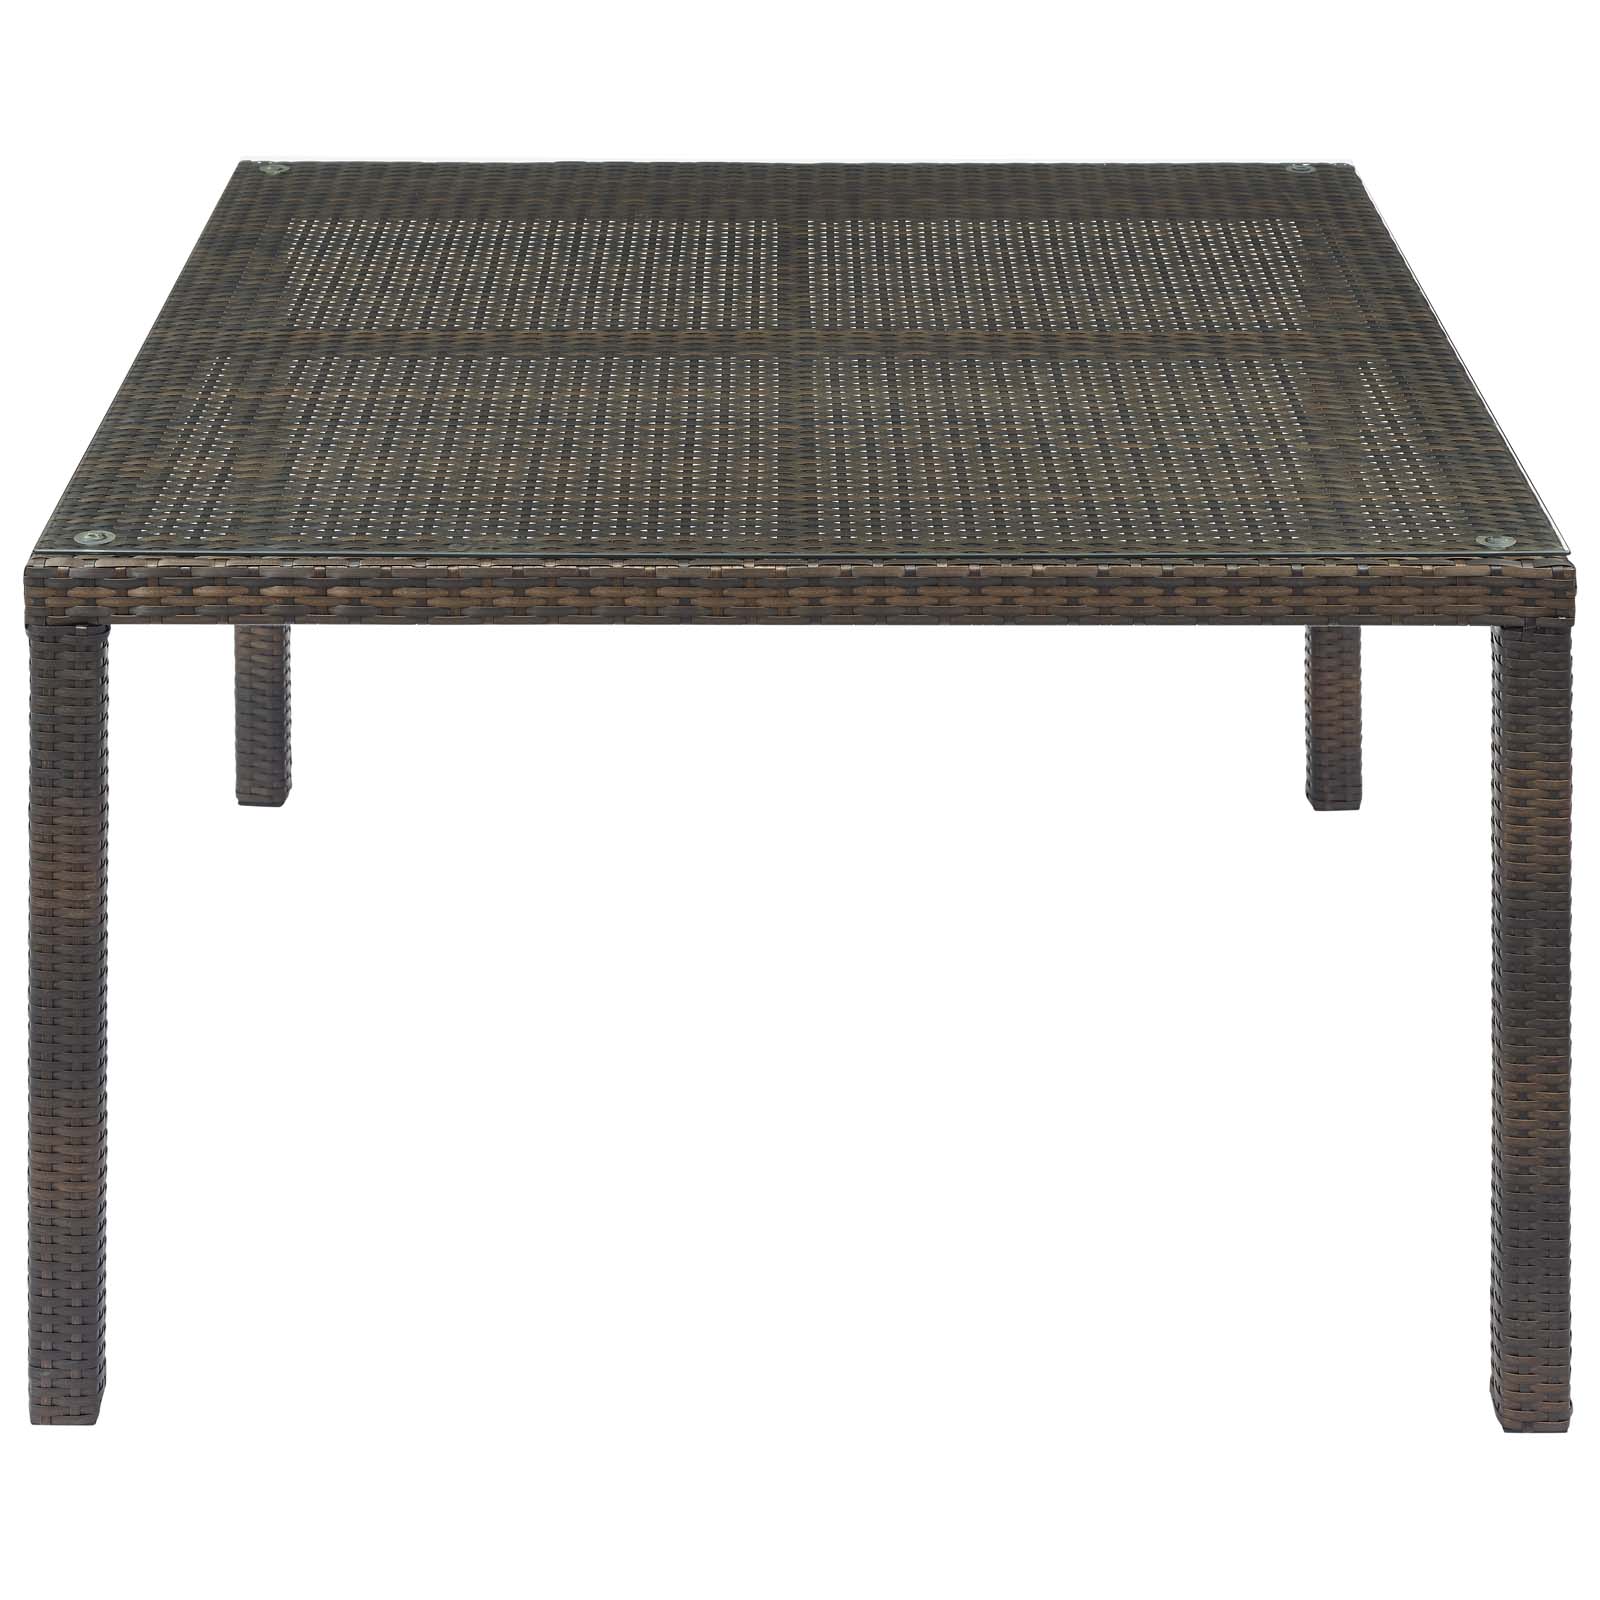 Modern Contemporary Urban Design Outdoor Patio Balcony Garden Furniture Lounge Dining Table, Rattan Wicker Glass, Brown - image 2 of 3